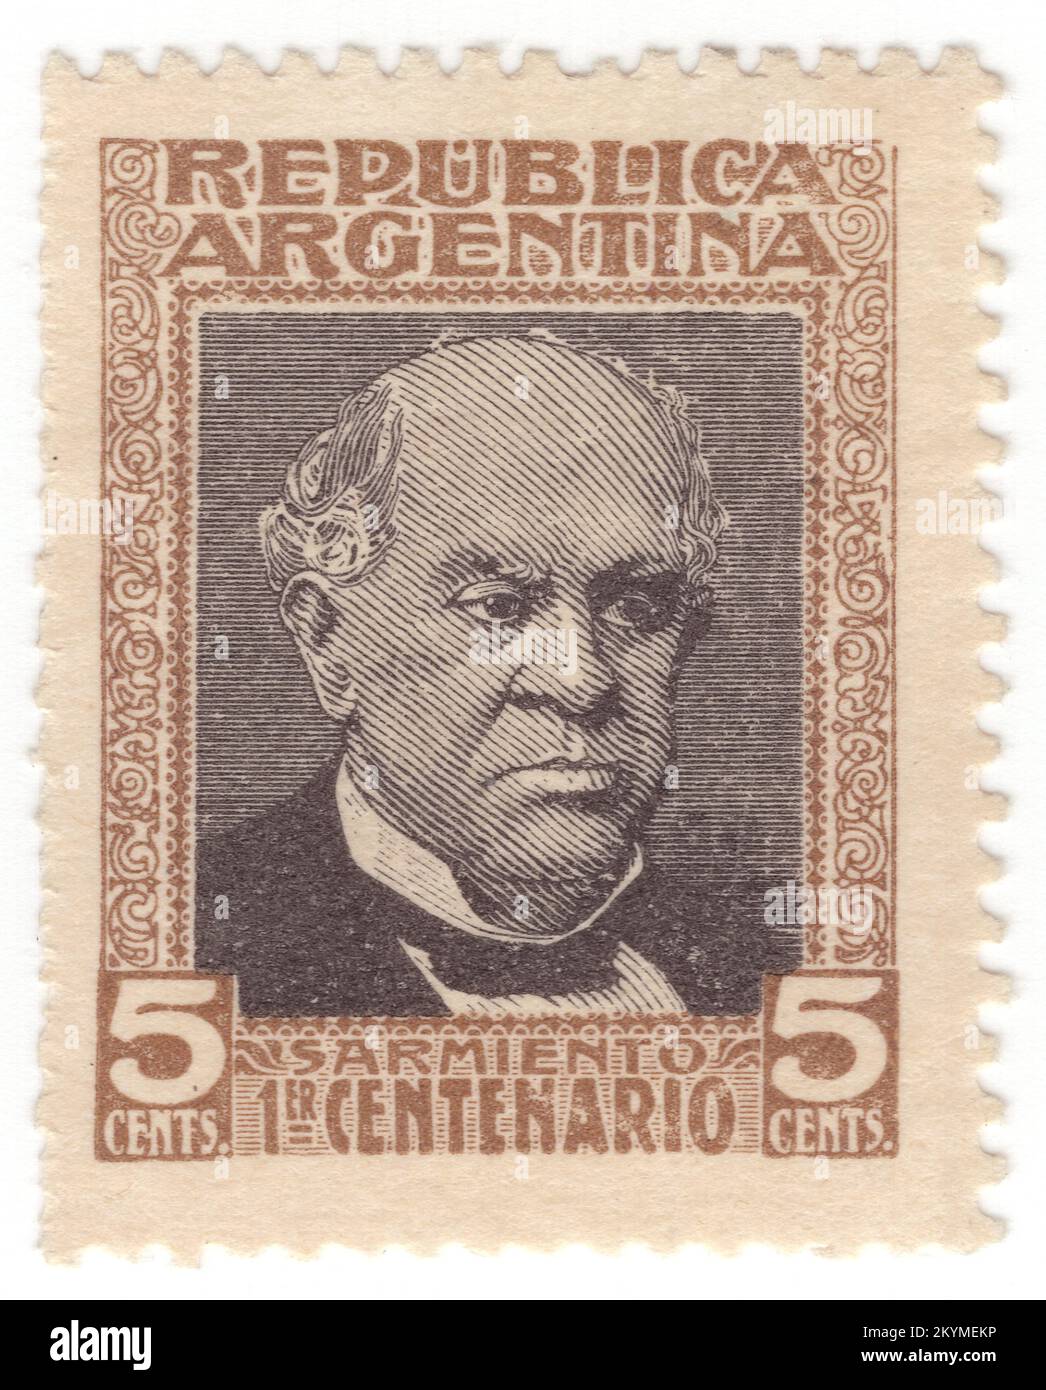 ARGENTINA - 1911: 5 centavos grey-brown and black postage stamp depicting portrait of Sarmiento. Domingo Faustino Sarmiento was an Argentine activist, intellectual, writer, statesman and the second President of Argentina. His writing spanned a wide range of genres and topics, from journalism to autobiography, to political philosophy and history. He was a member of a group of intellectuals, known as the Generation of 1837, who had a great influence on 19th-century Argentina. He was particularly concerned with educational issues and was also an important influence on the region's literature Stock Photo